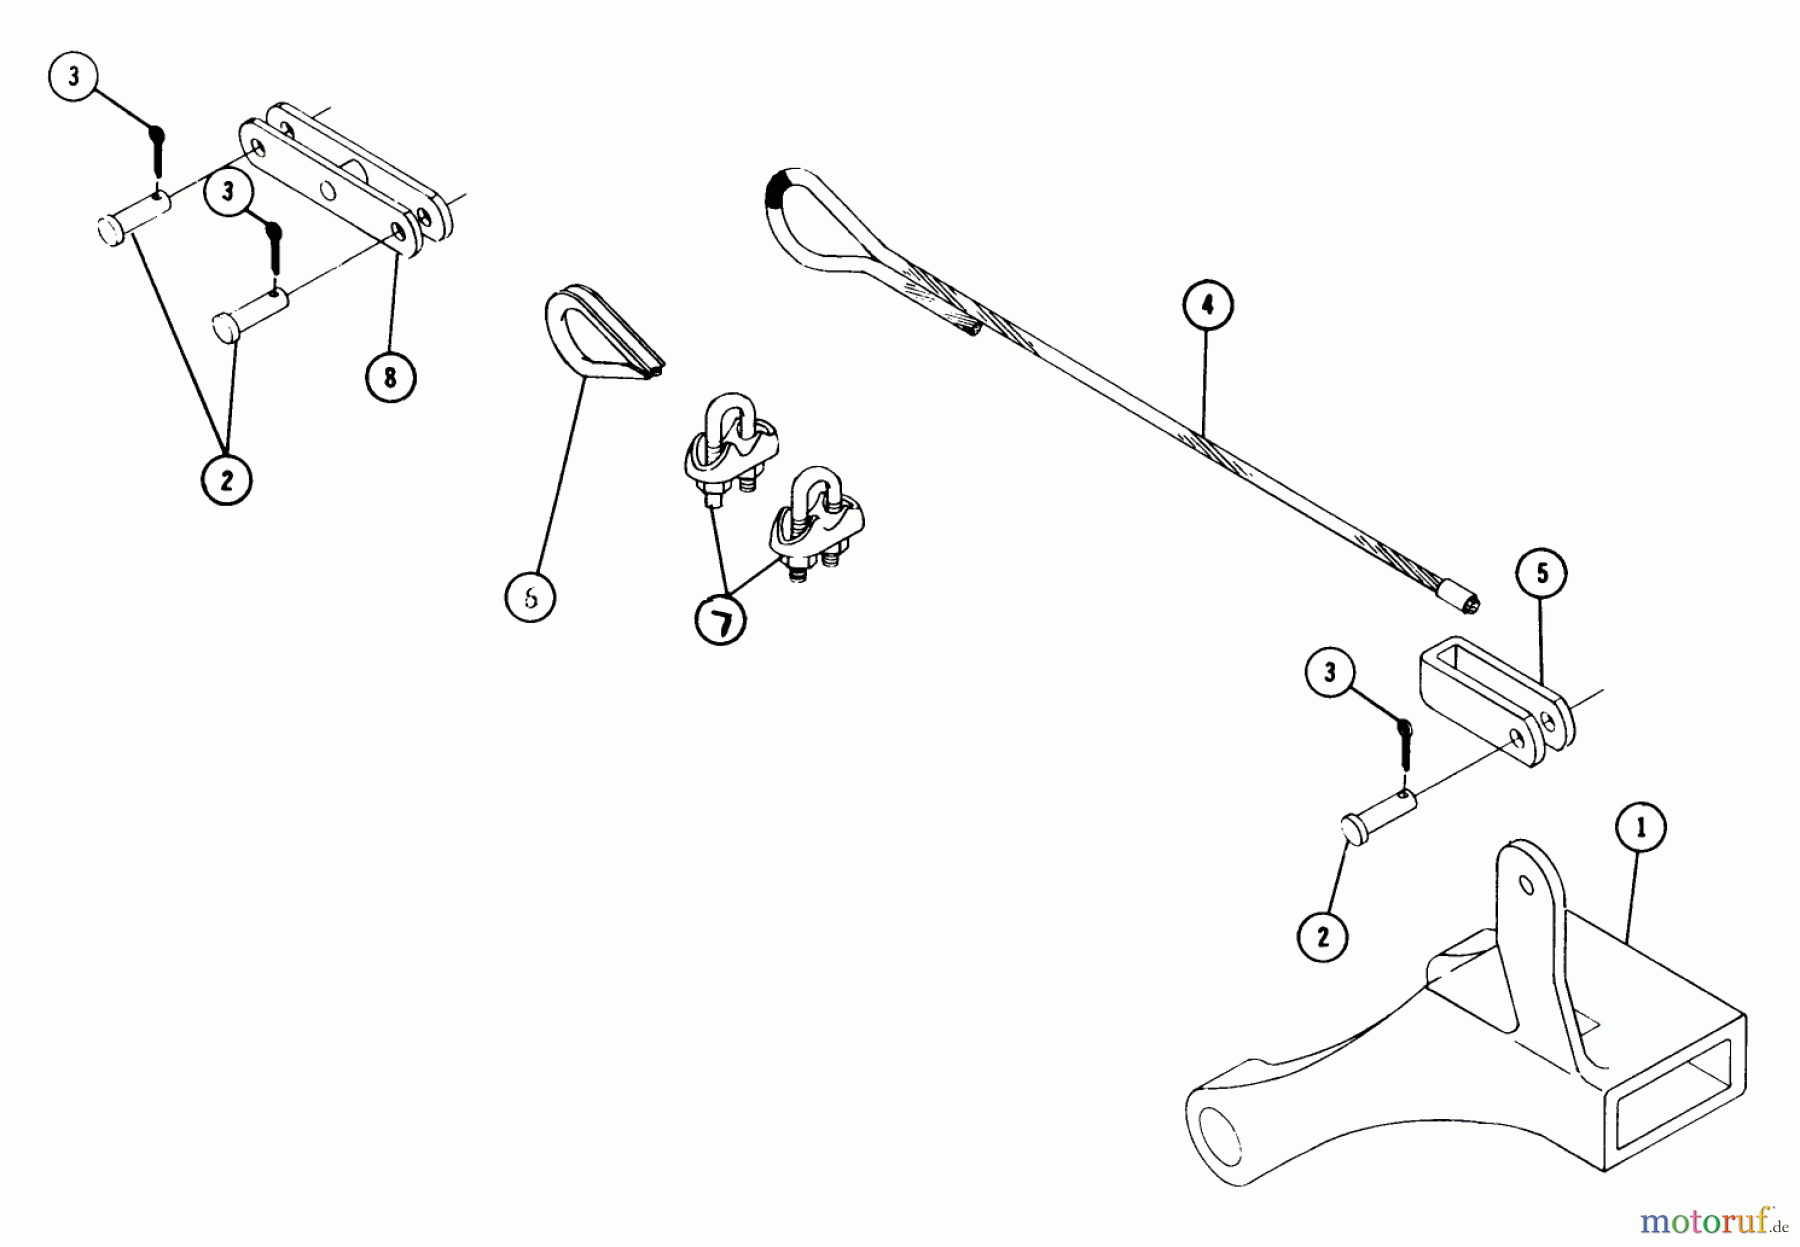  Toro Neu Accessories, Mower 85521 - Toro Slot Hitch, 1971 PARTS LIST-IMPLEMENT HITCH (SLOT TYPE) FACTORY ORDER NUMBER 8-5521